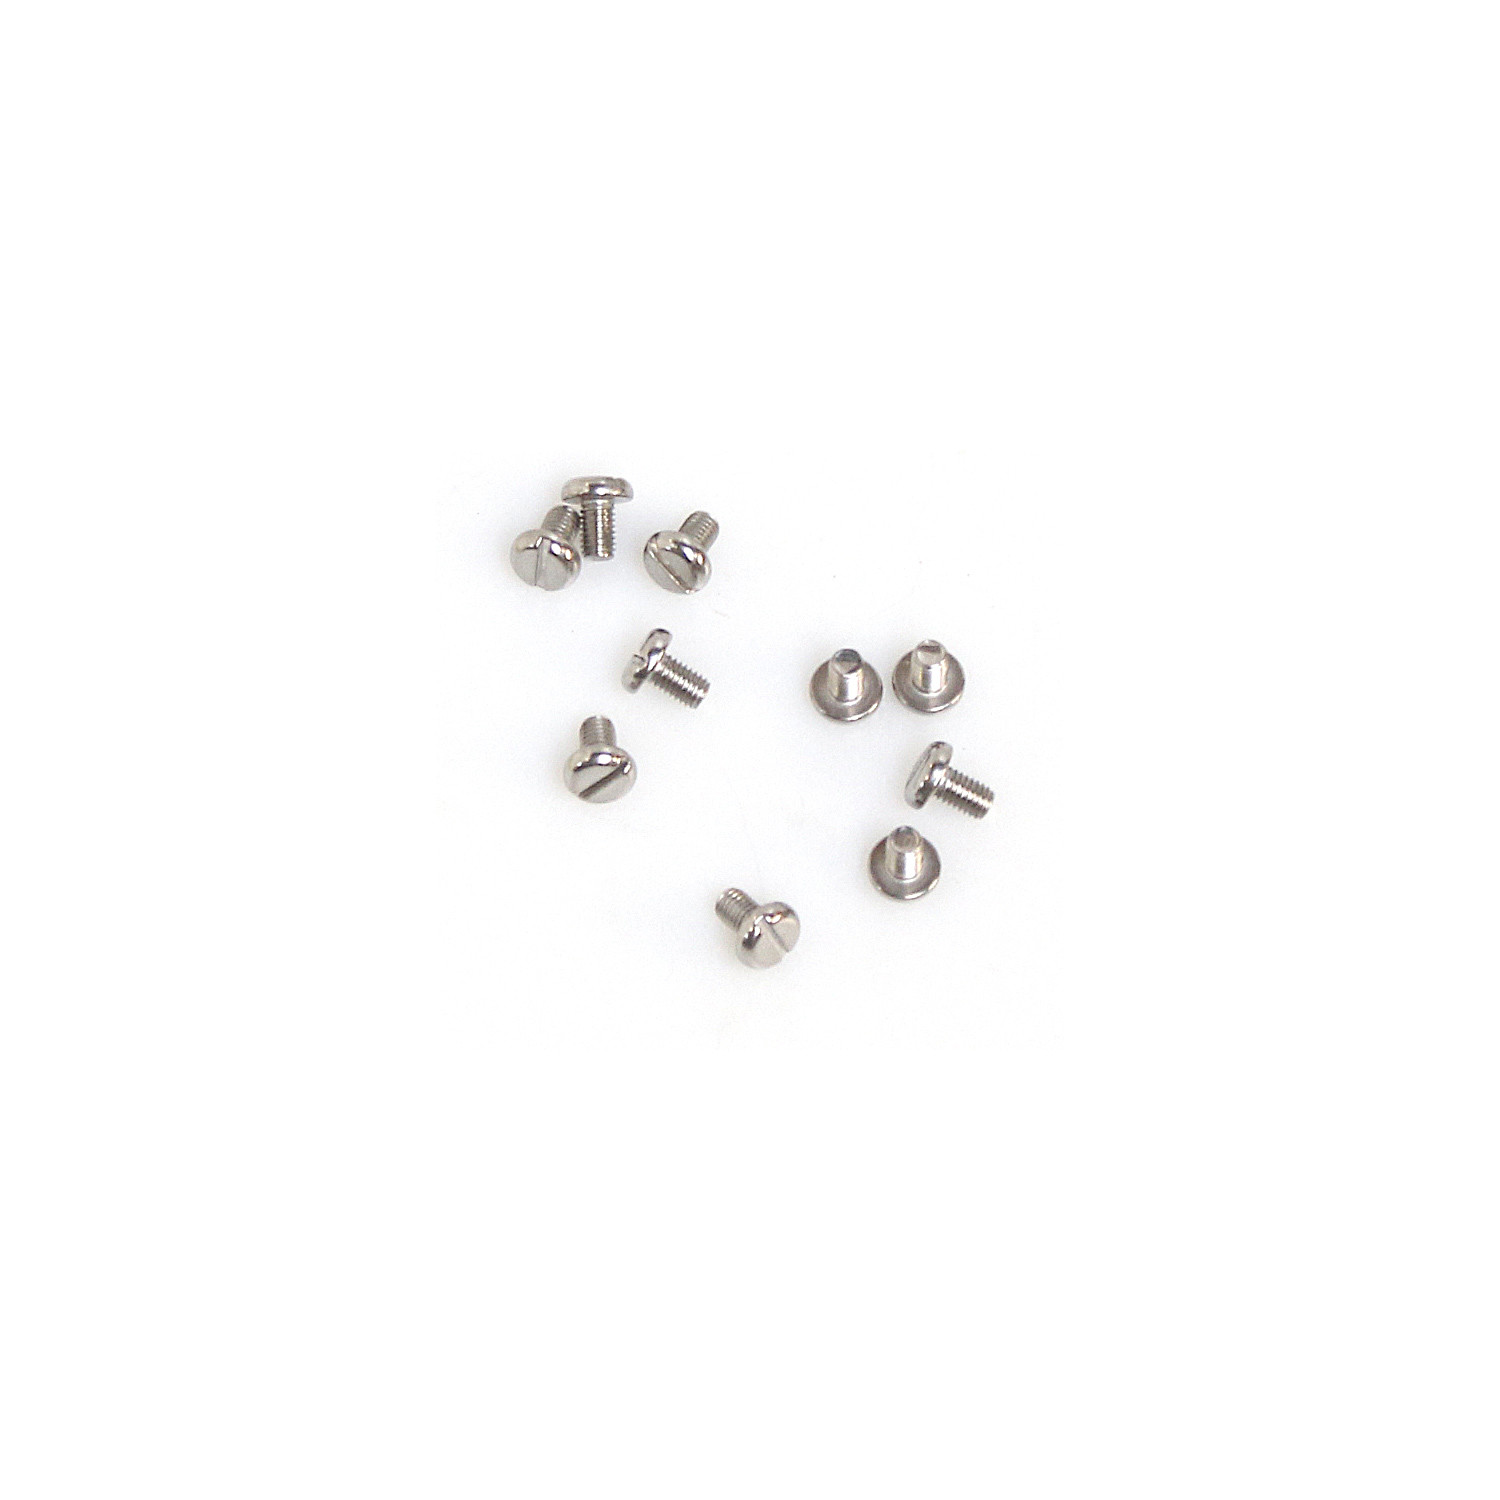 BAG WITH 10 STAINLESS STEEL SCREWS.
replaces 2200102
